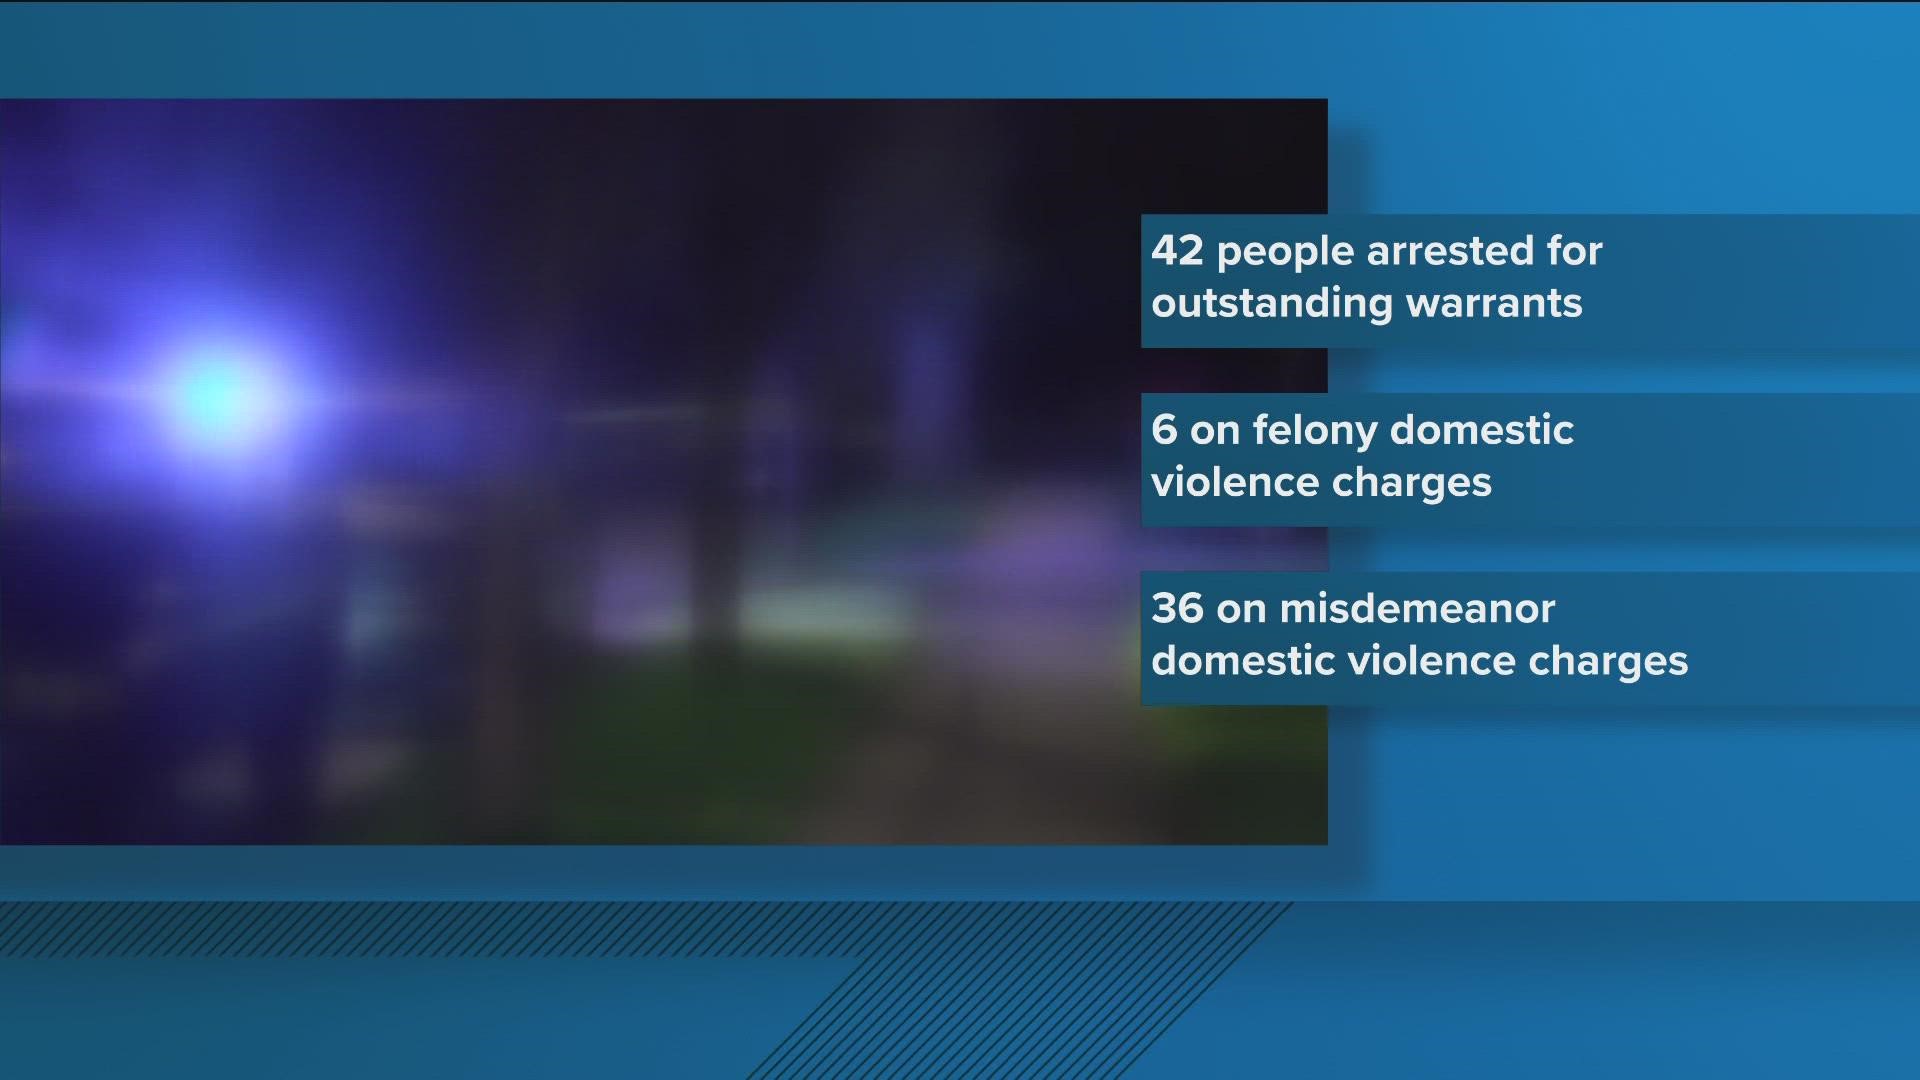 Six of those warrants were felony domestic violence charges. 36 warrants were misdemeanor domestic violence charges. The 2021 round-up resulted in 45 total arrests.